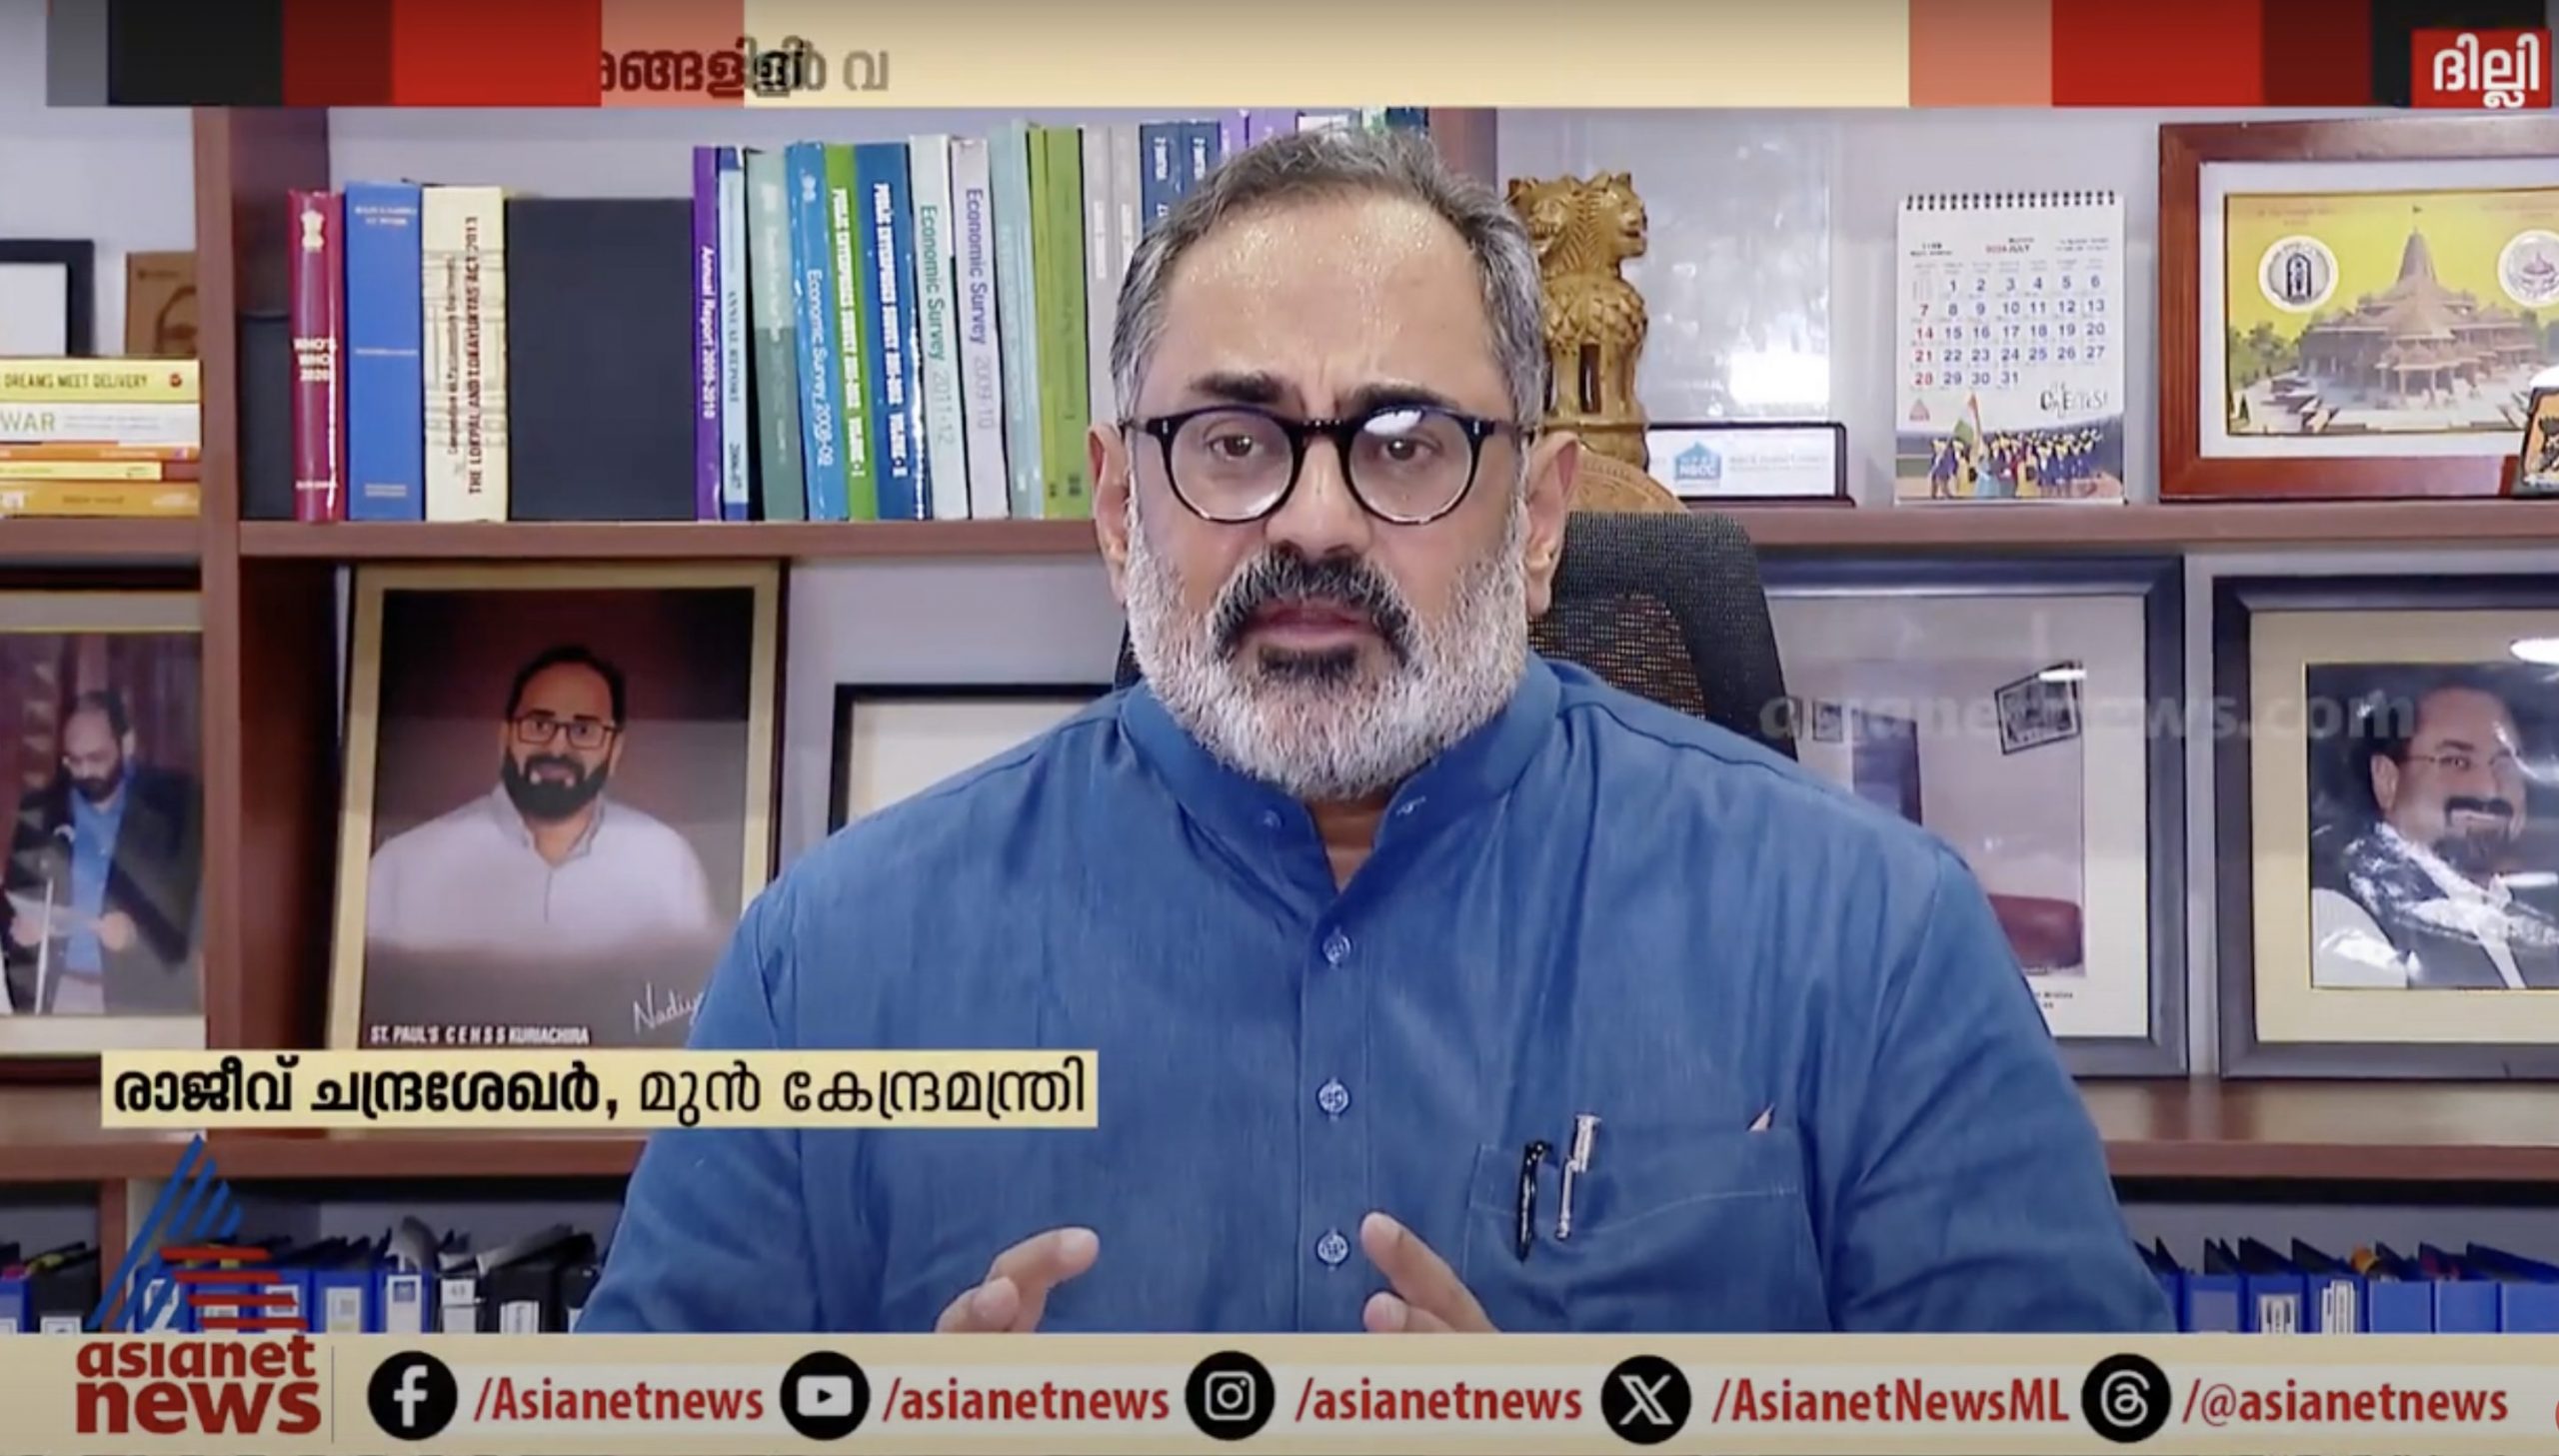 Rajeev Chandrasekhar's promised Idhaanu Karyam for Thiruvananthapuram in his 100 day agenda commences with Government of Indias Fisheries Ministry.